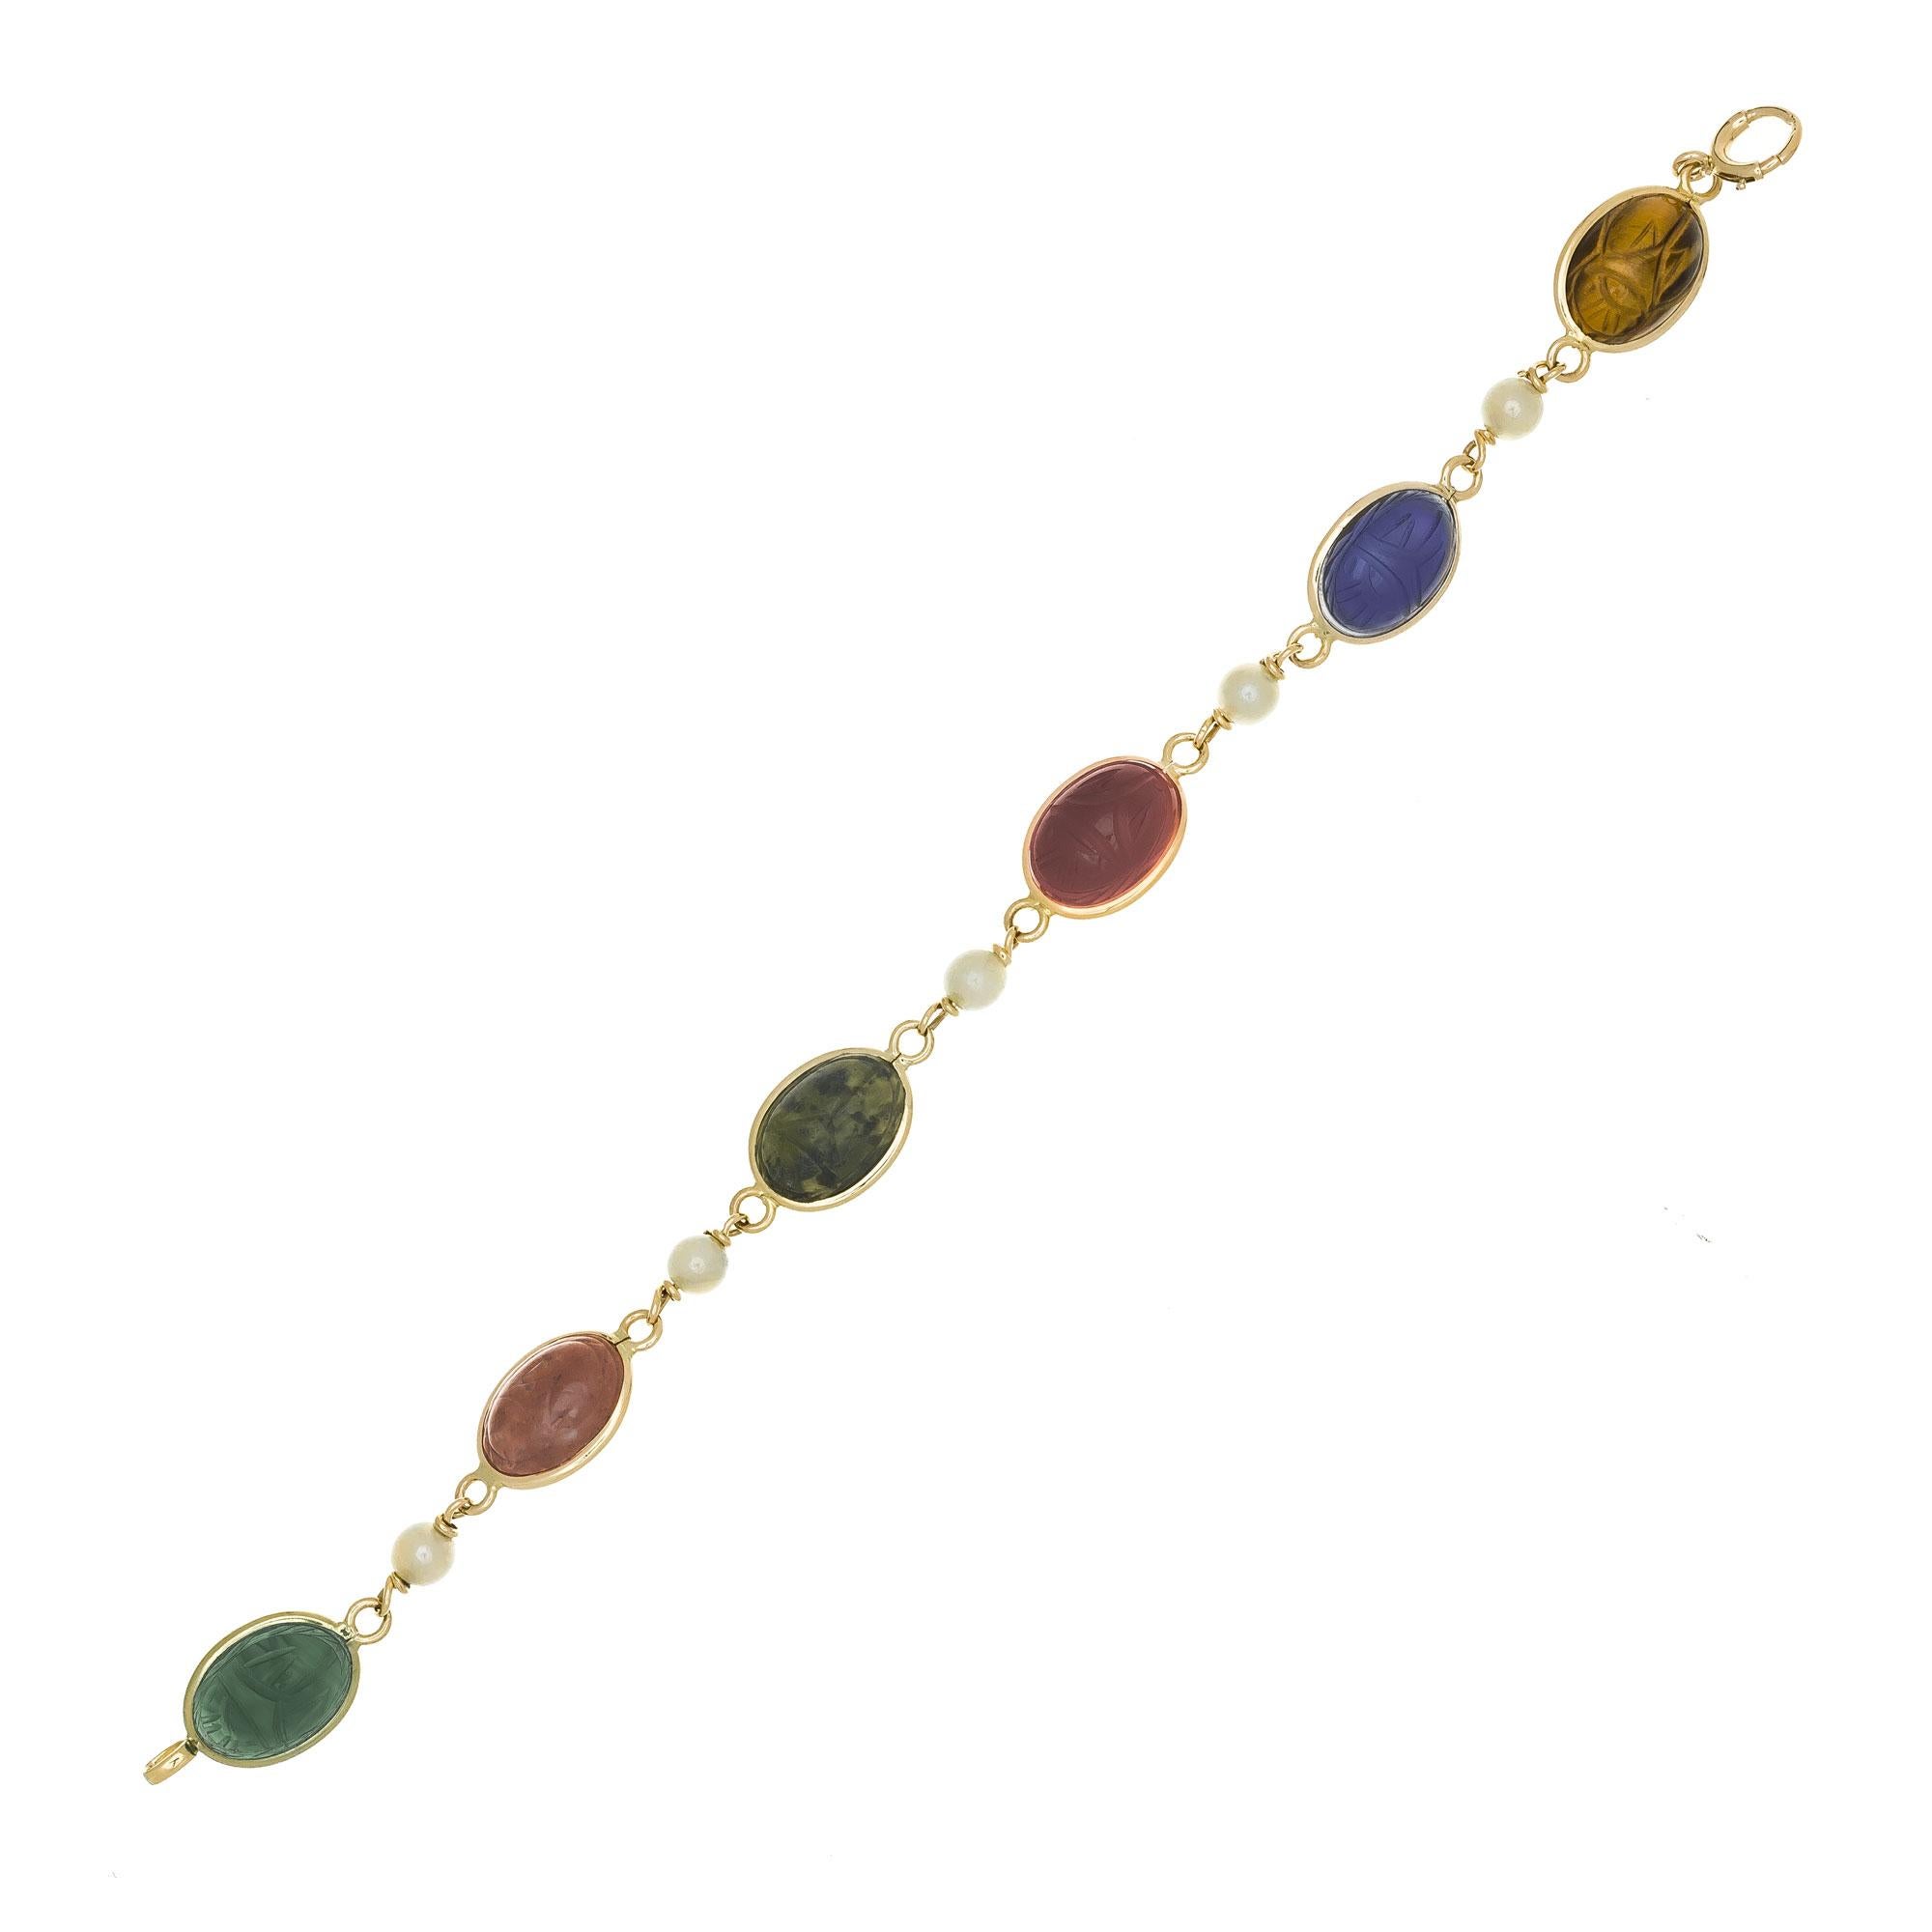 Vintage 1950's 14k yellow gold oval scarab link bracelet with 5 white/ gray hue 5mm pearls. 7.5 inches long.  

5 white gray hue pearls, 5mm
6 Tigers eye, lapis, carnelian, bloodstone, coral, nephrite oval scarabs 
14k yellow gold 
Stamped: 14k
10.8